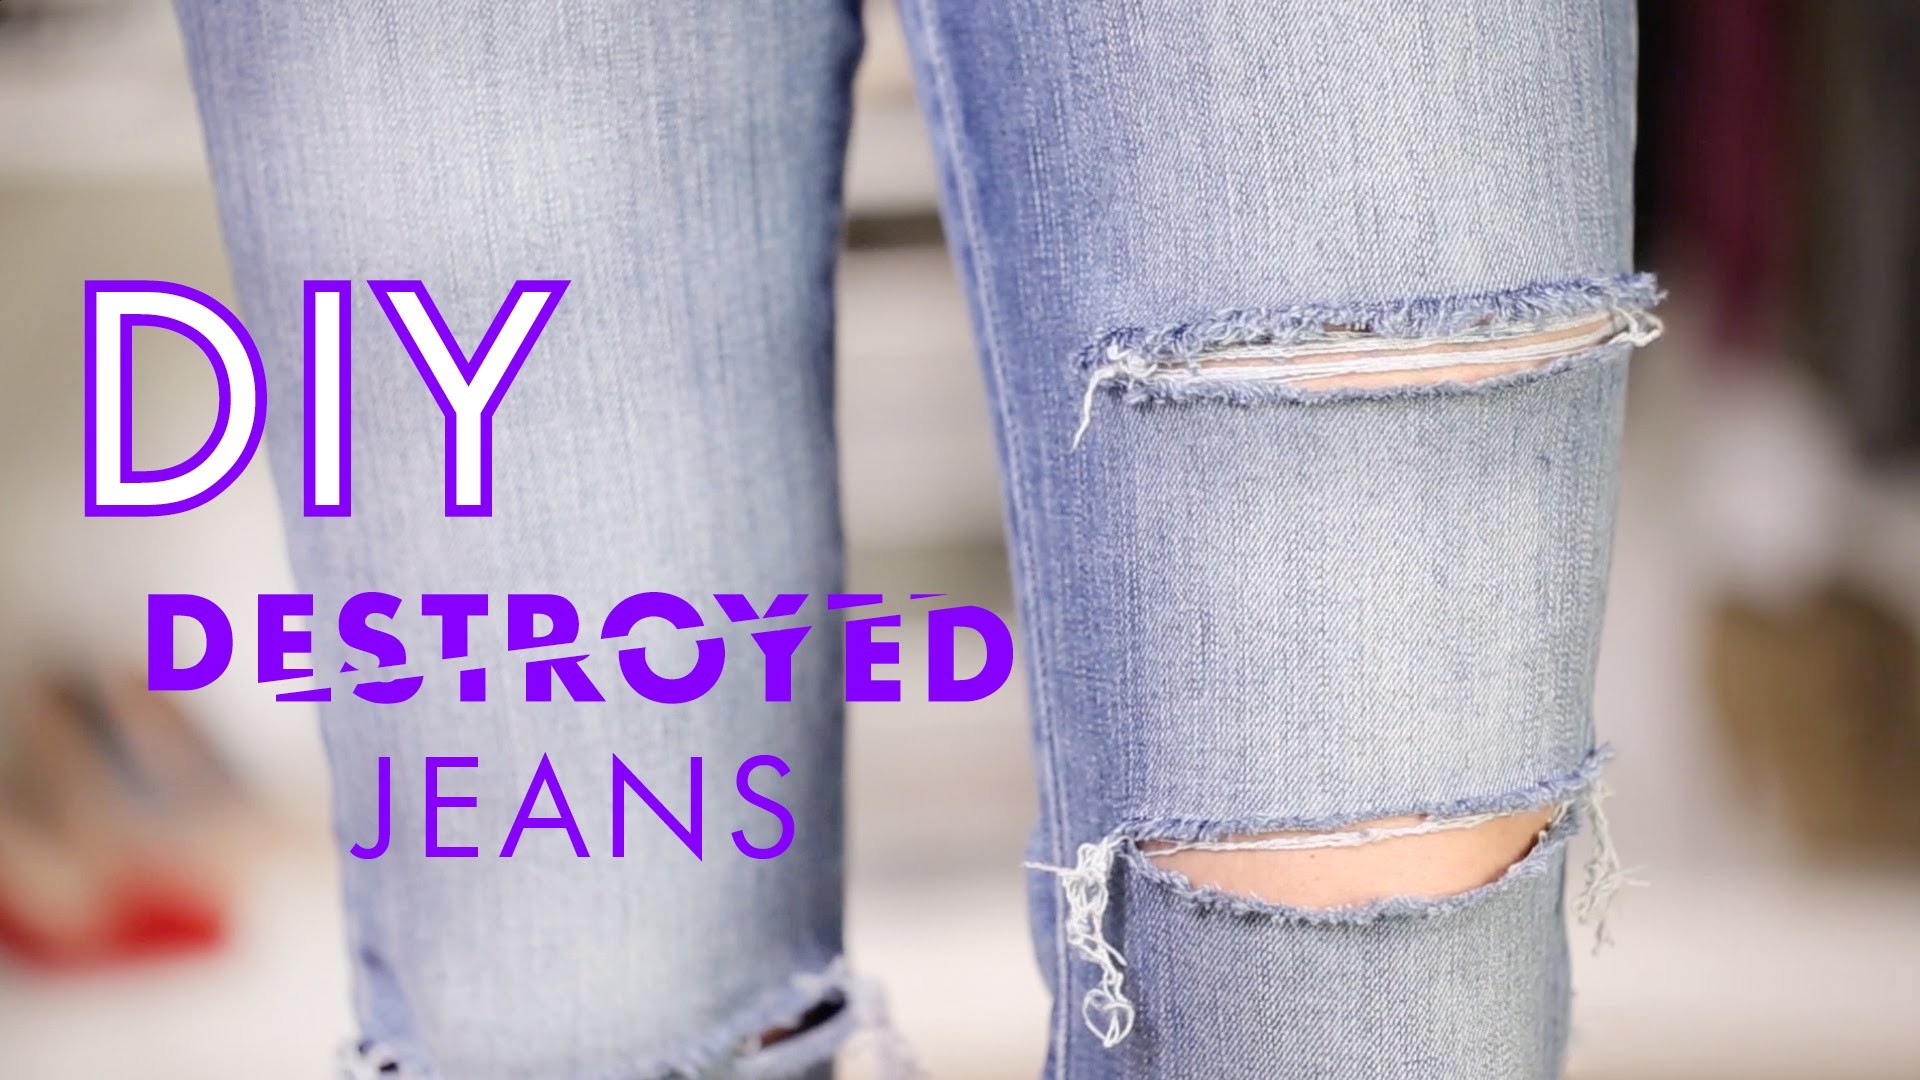 DIY Destroyed Jeans ♥ Do-It-Yourself Tutorial ♥ How To Wear STYLIGHT